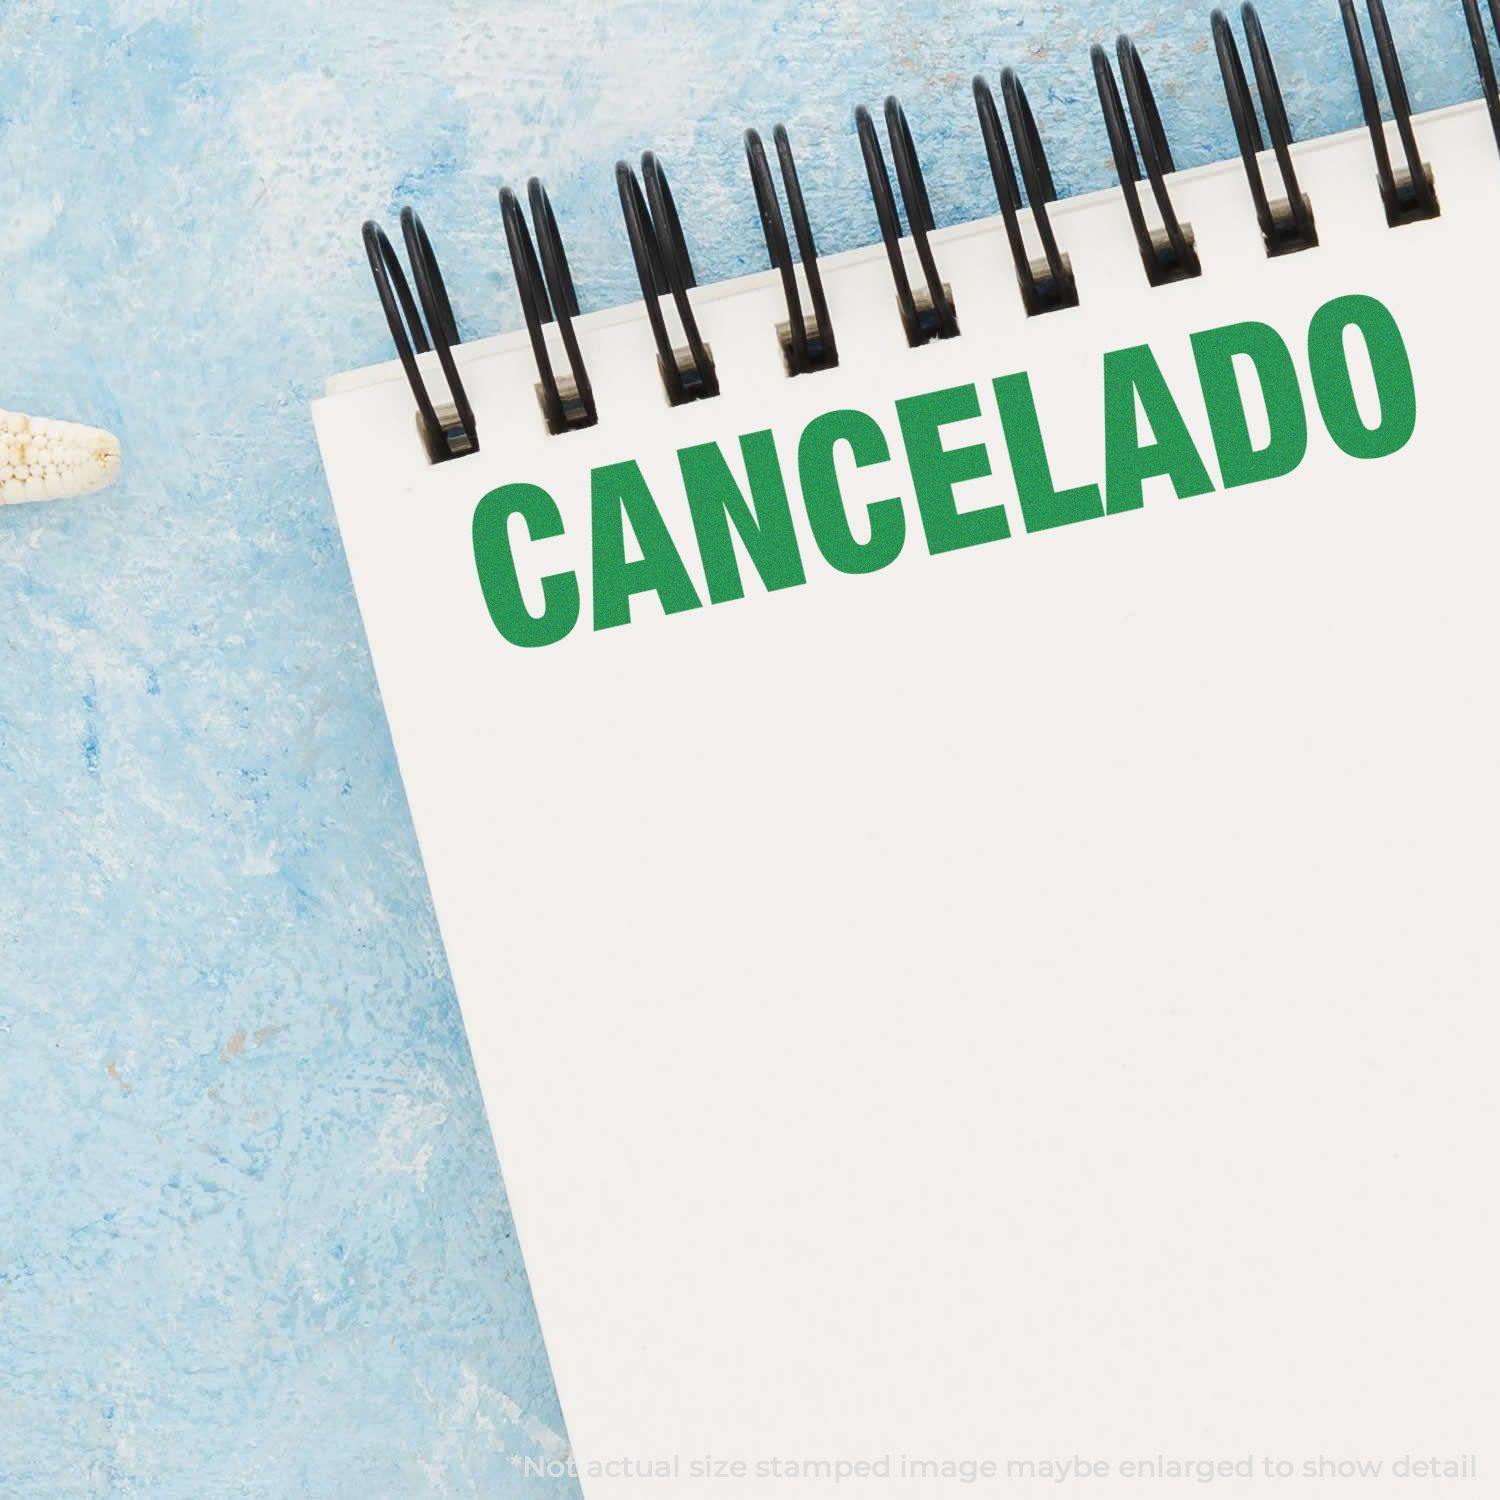 A self-inking stamp with a stamped image showing how the text "CANCELADO" in a large font is displayed by it after stamping.